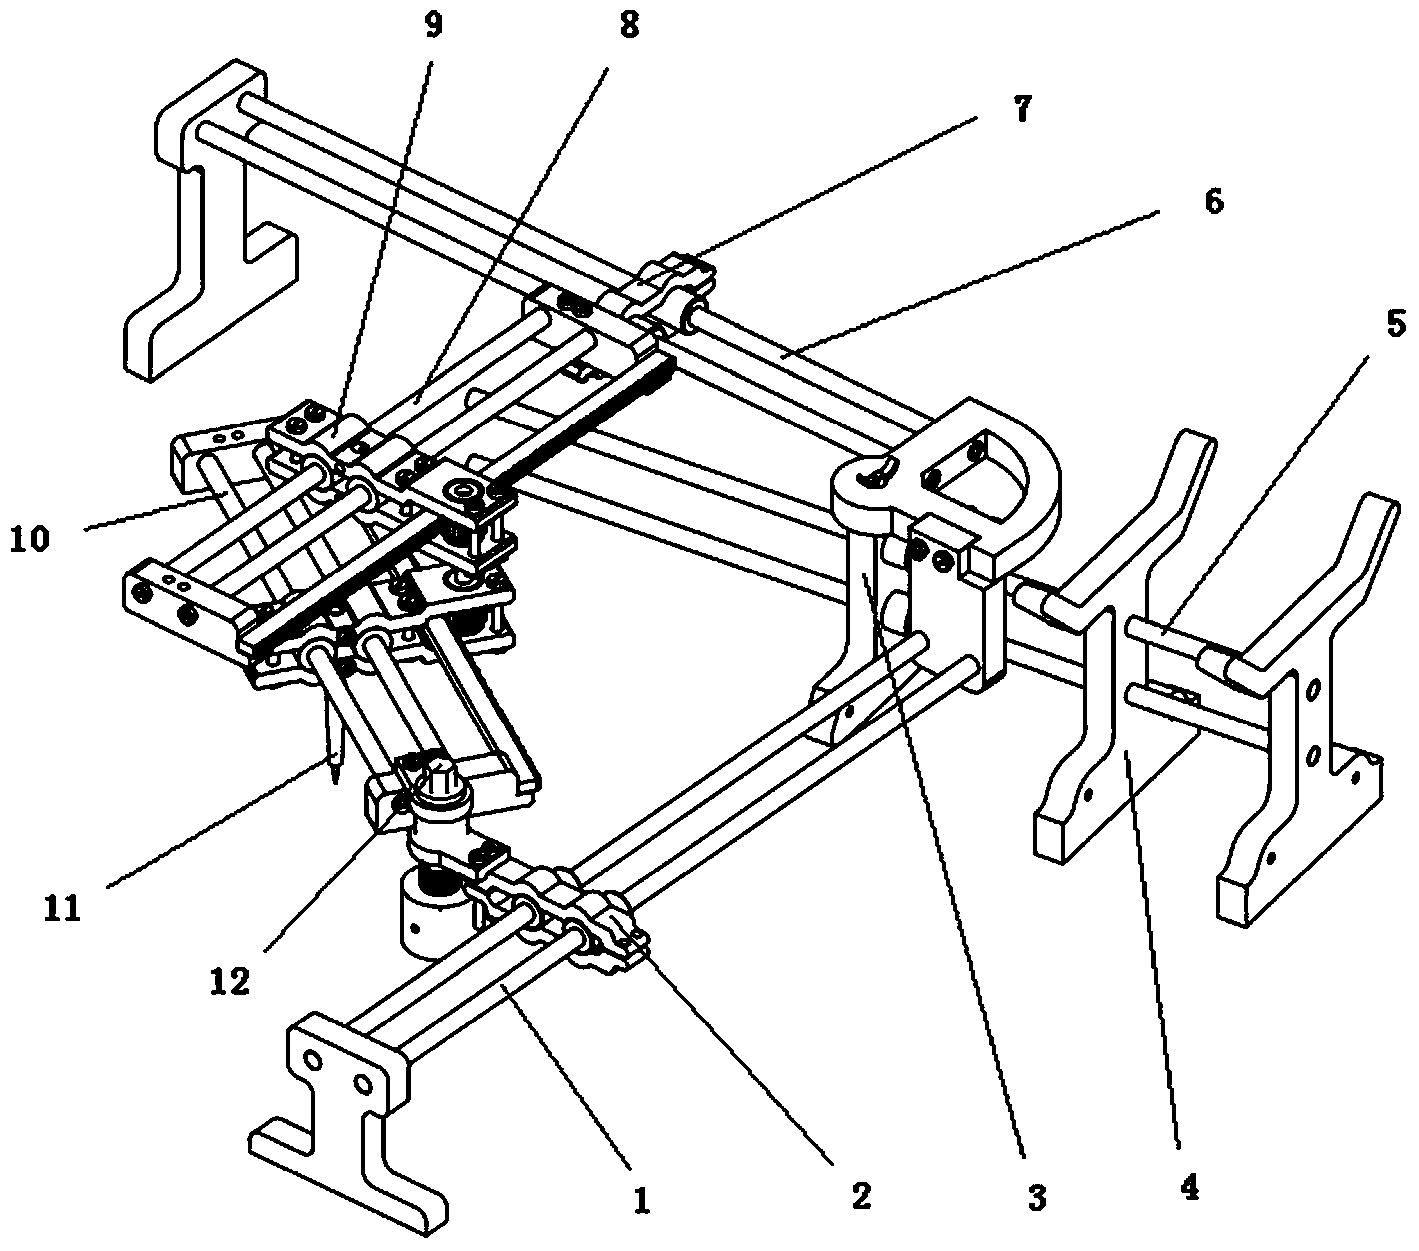 Conical curve drawing device